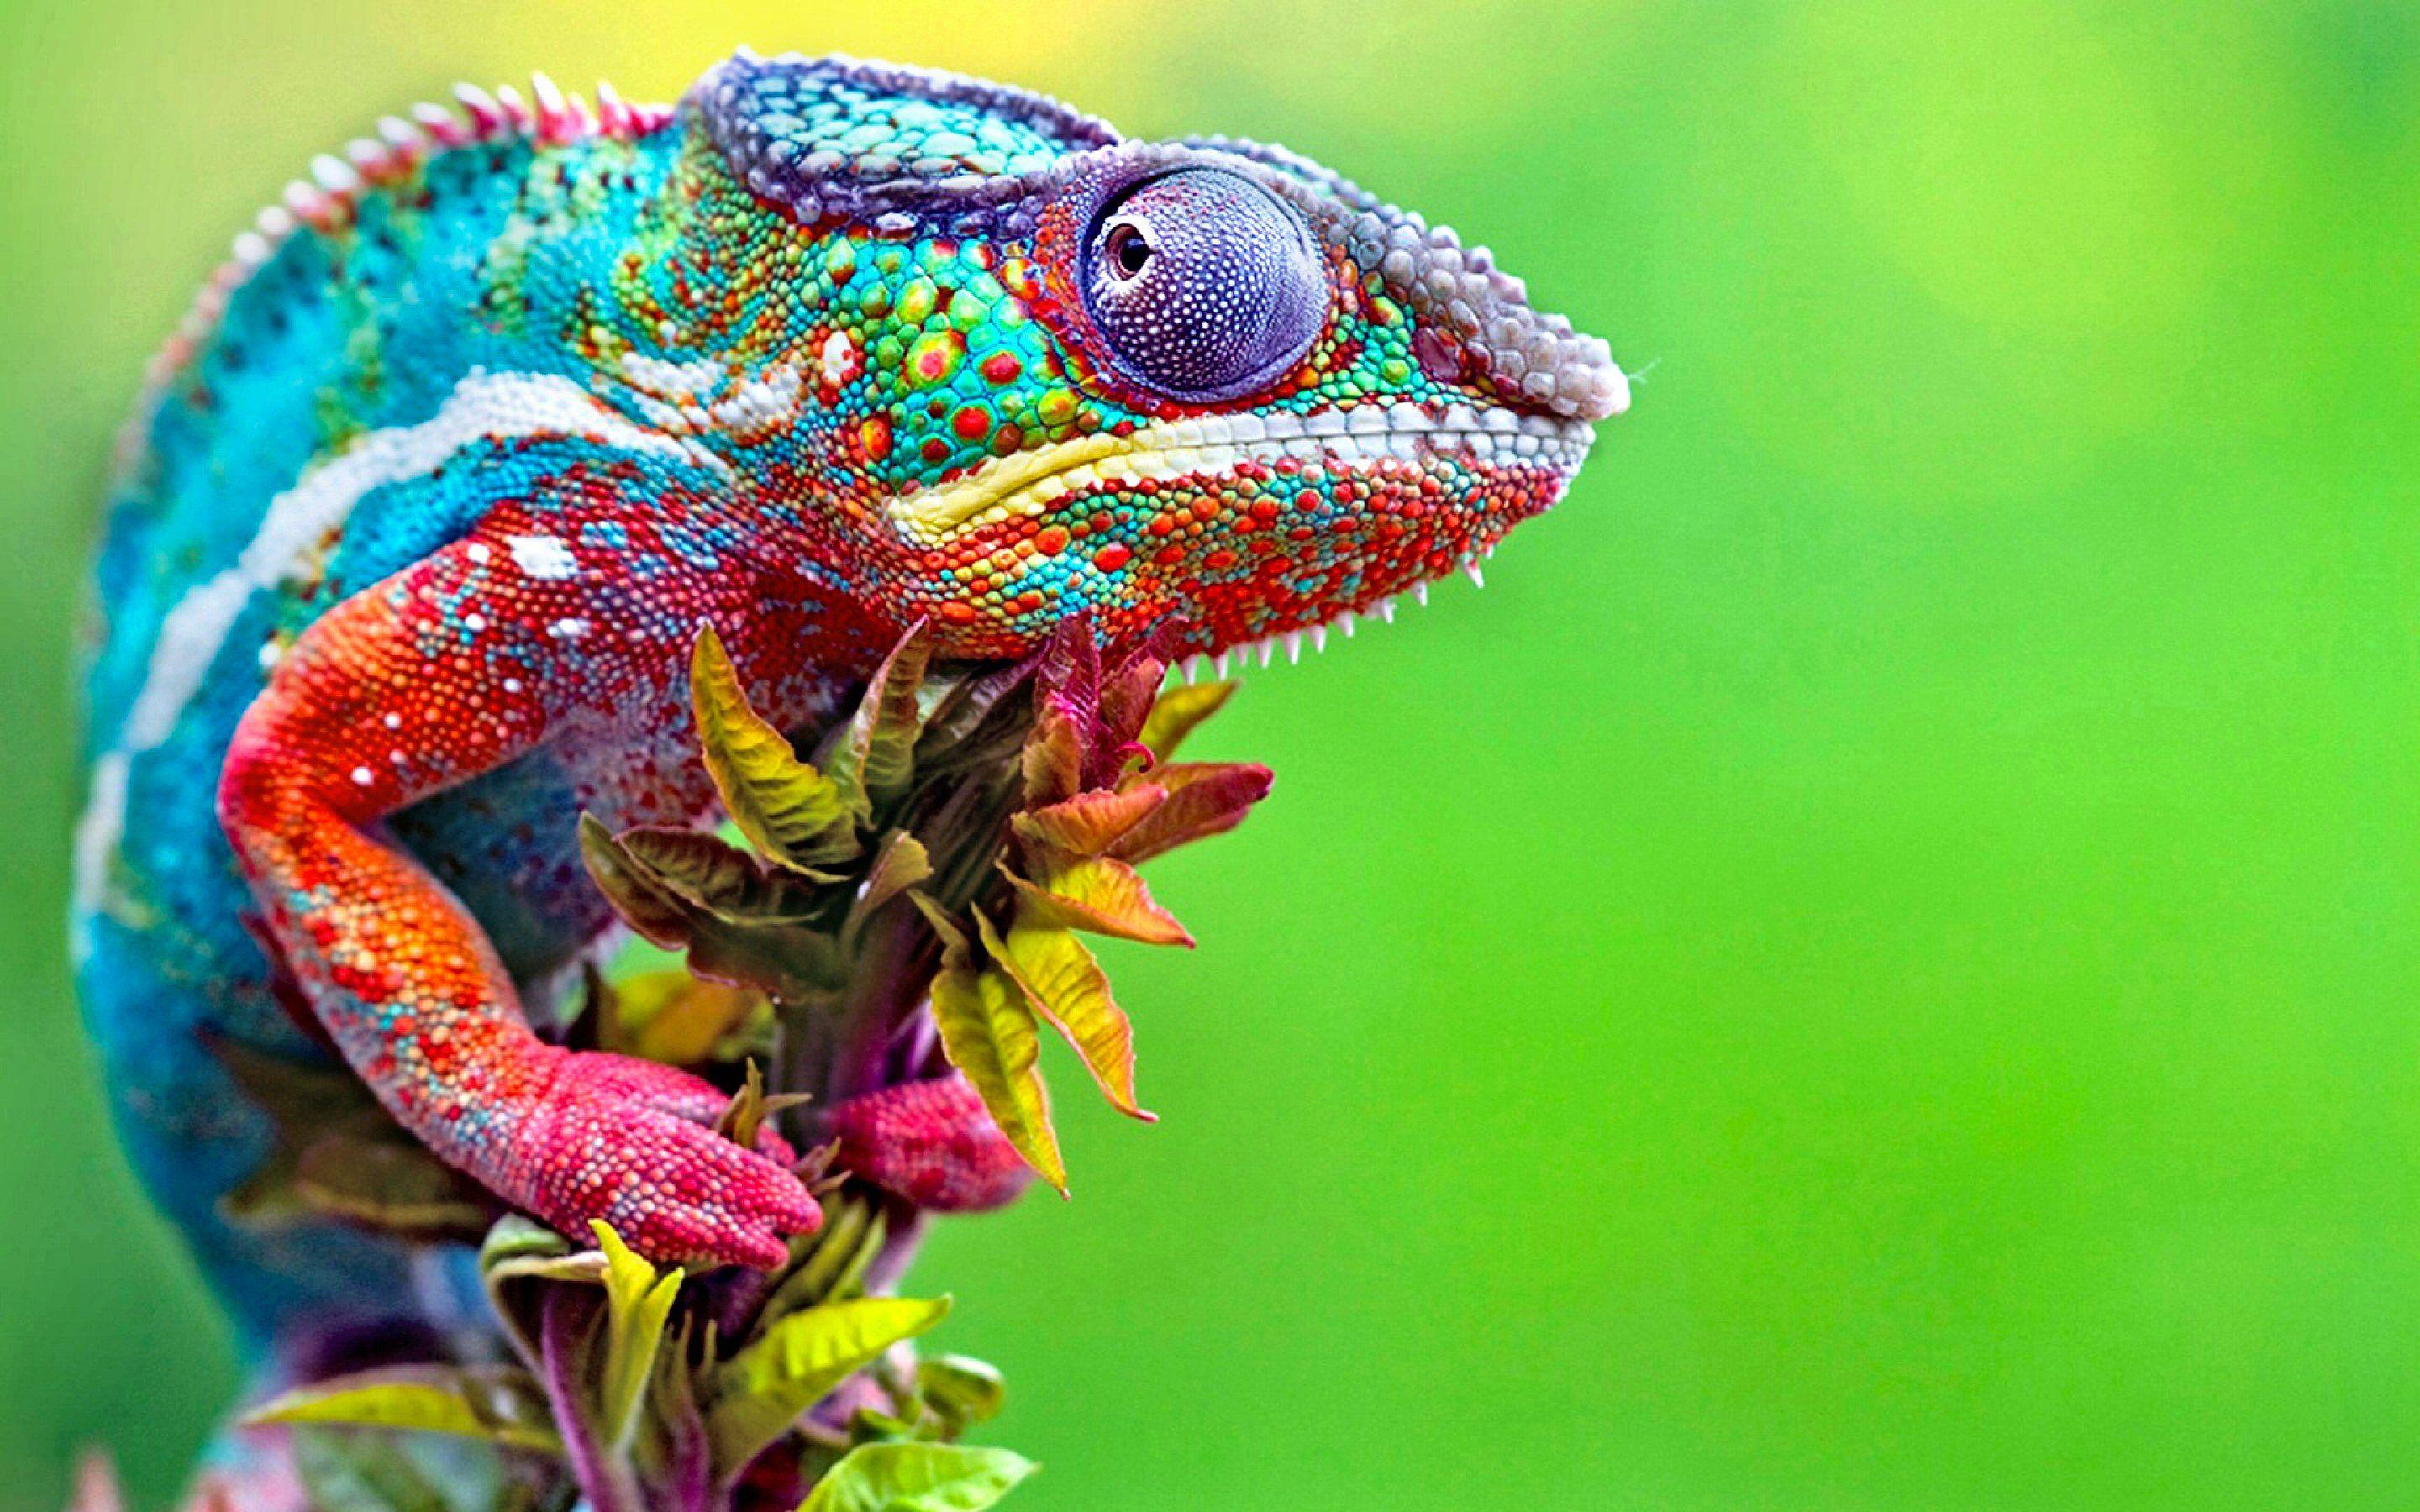 Spectral Confusion [01] colorful panther chameleon